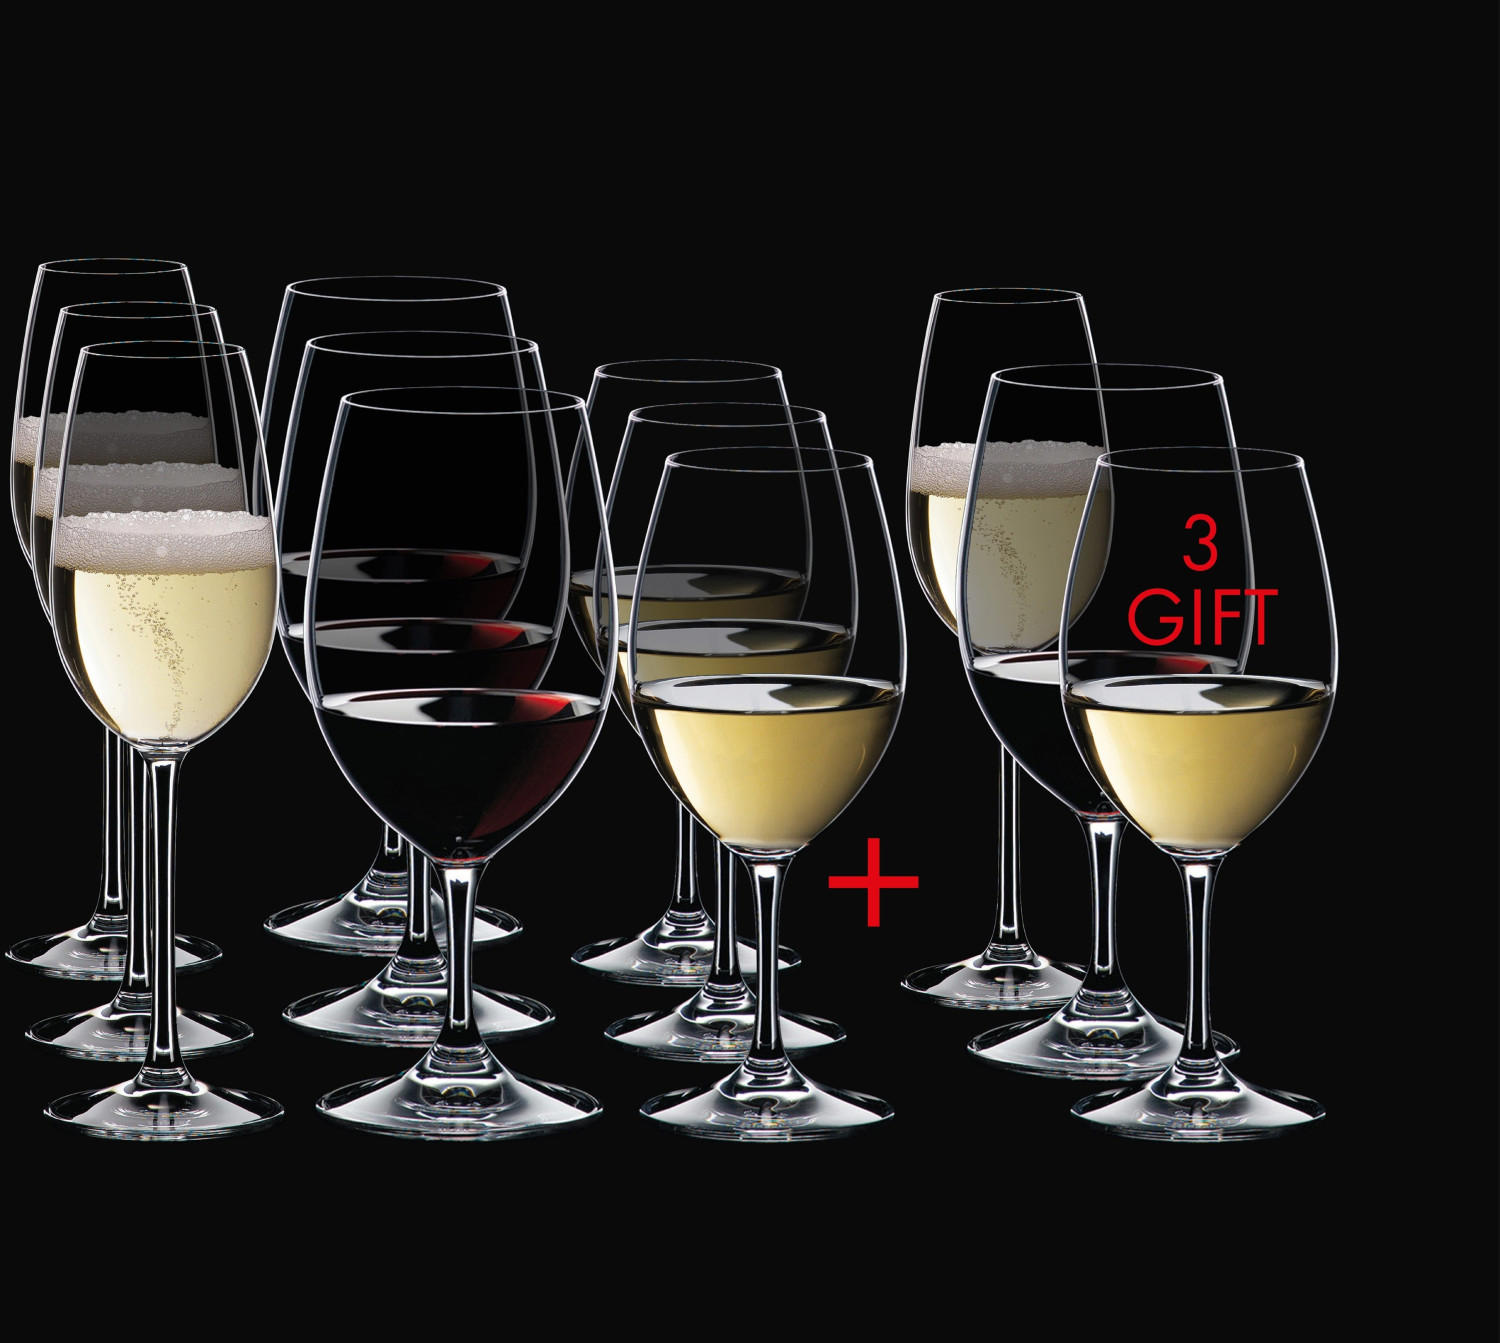 Riedel Overture white wine / magnum / champagne glass benefit set purchase 12 number 9